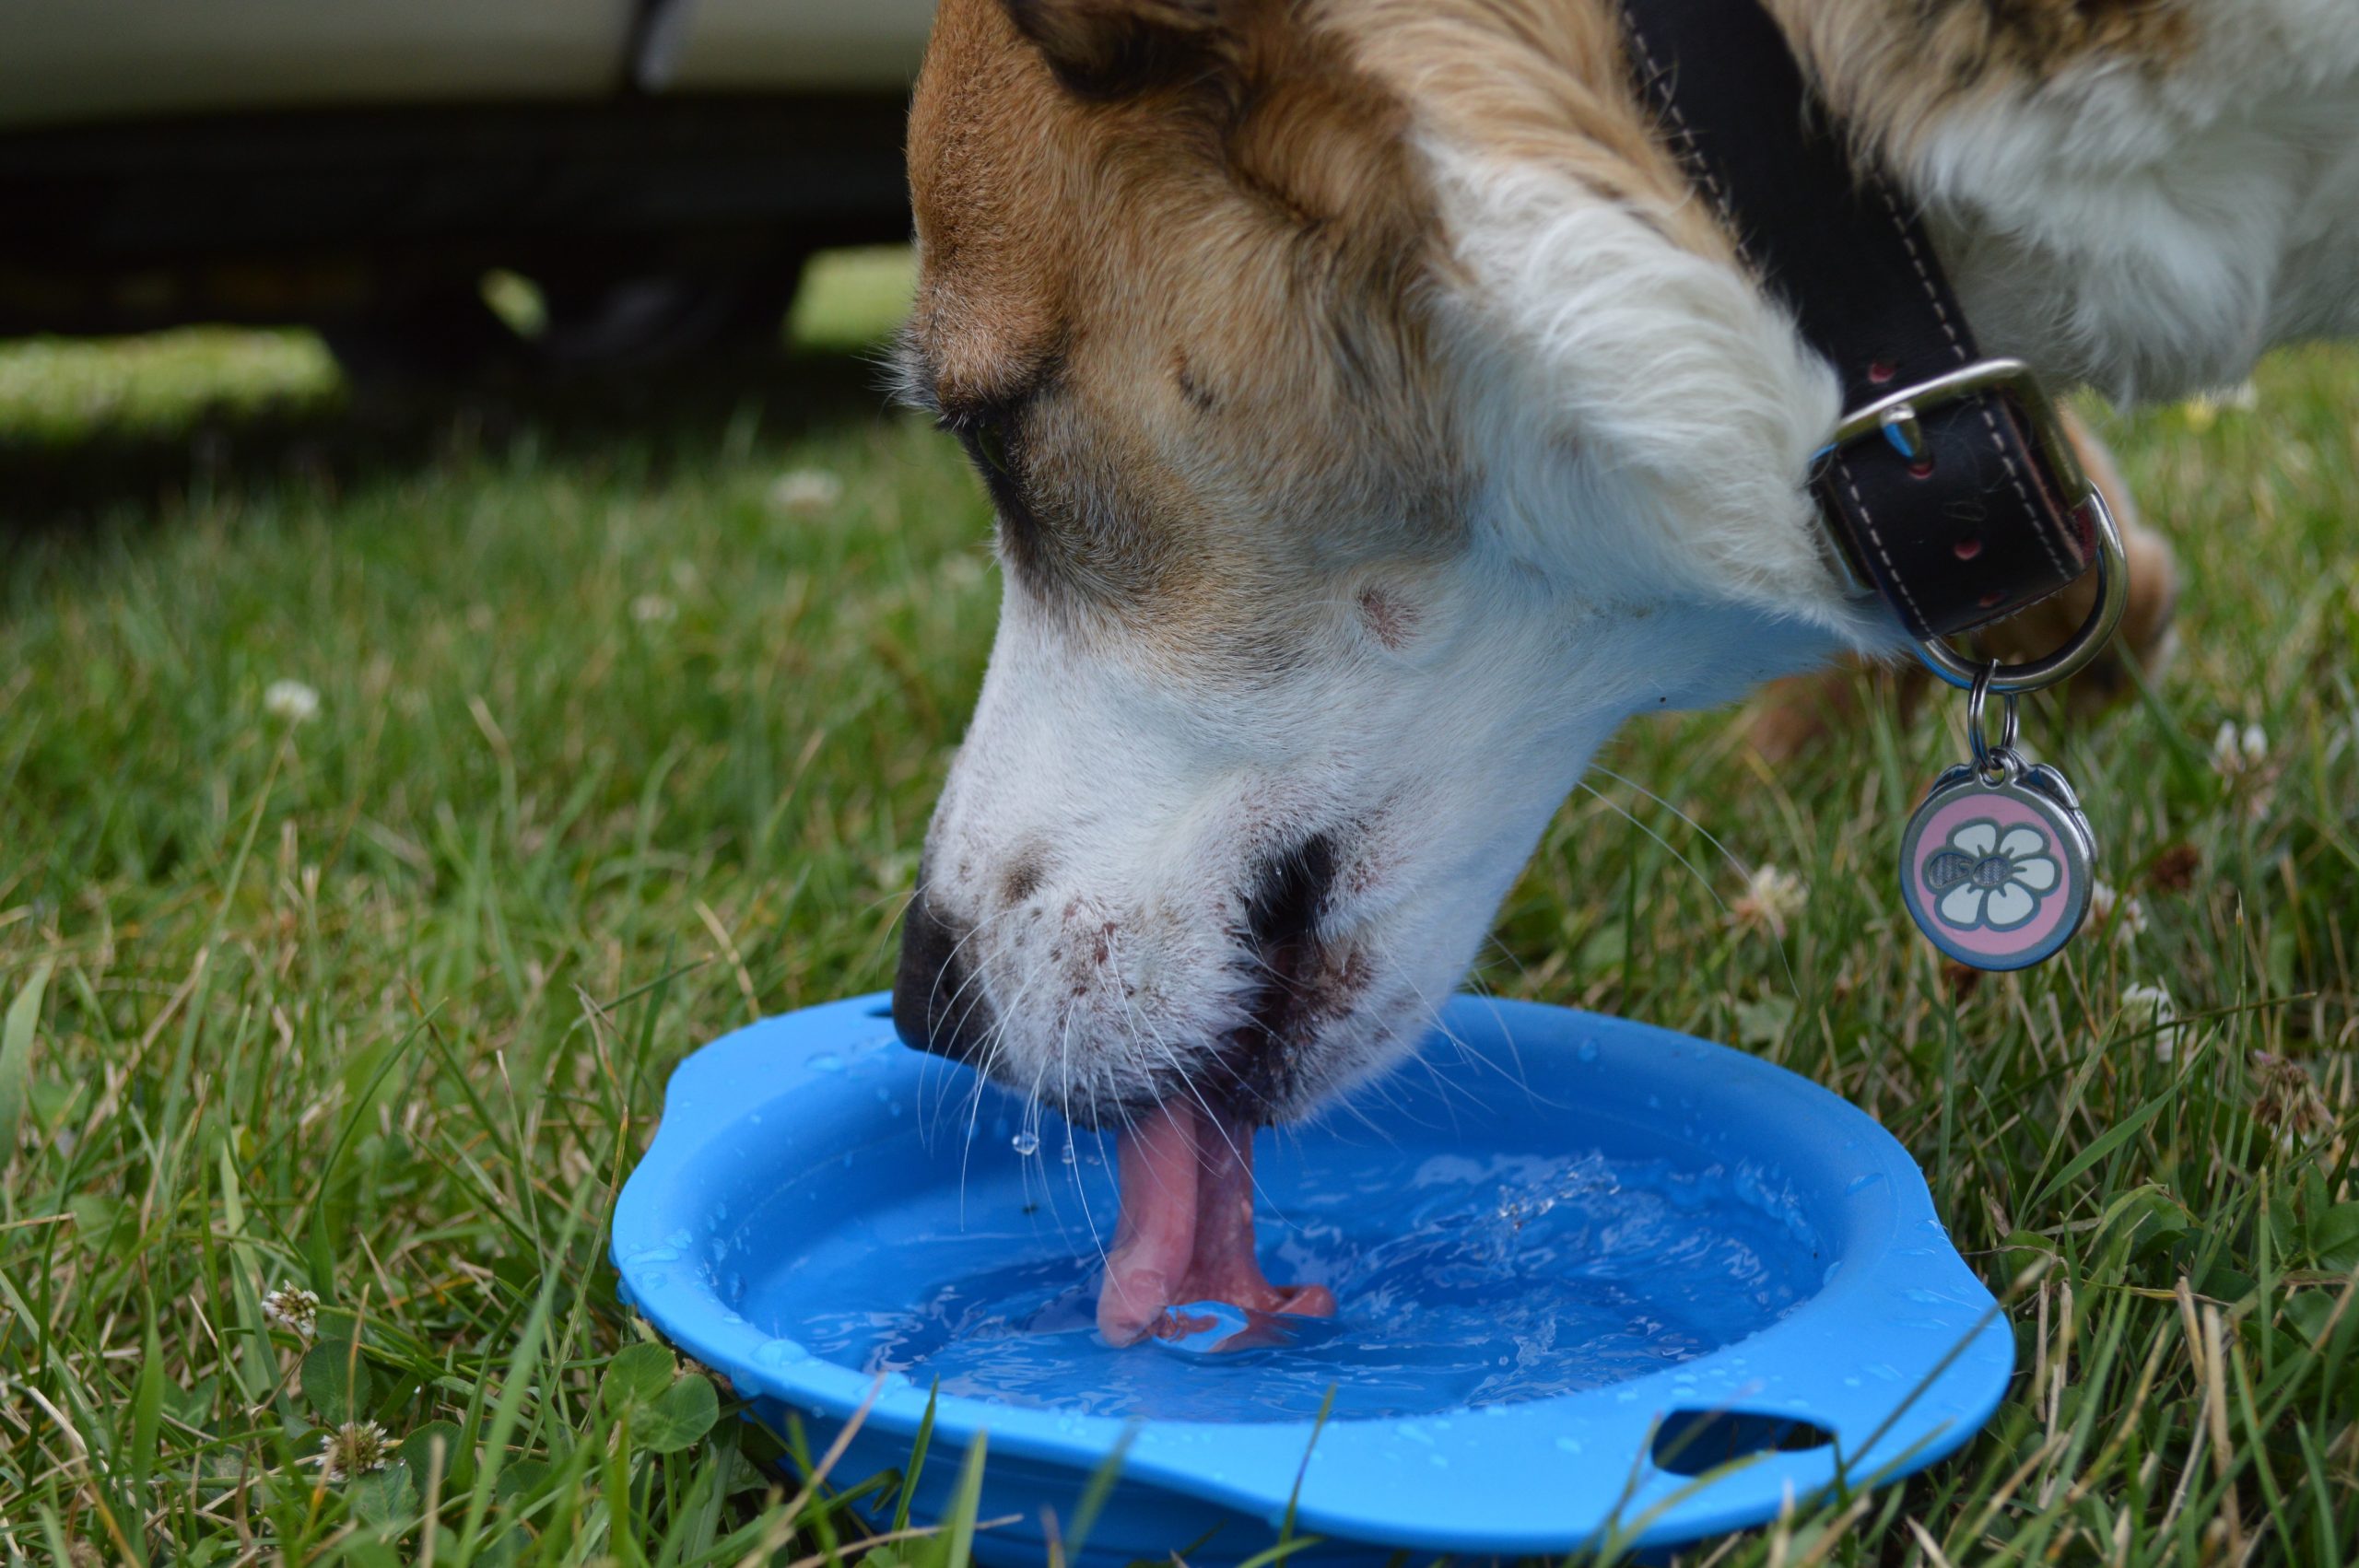 The 10 Best Travel Water Bowls for Dogs, Tested and Reviewed